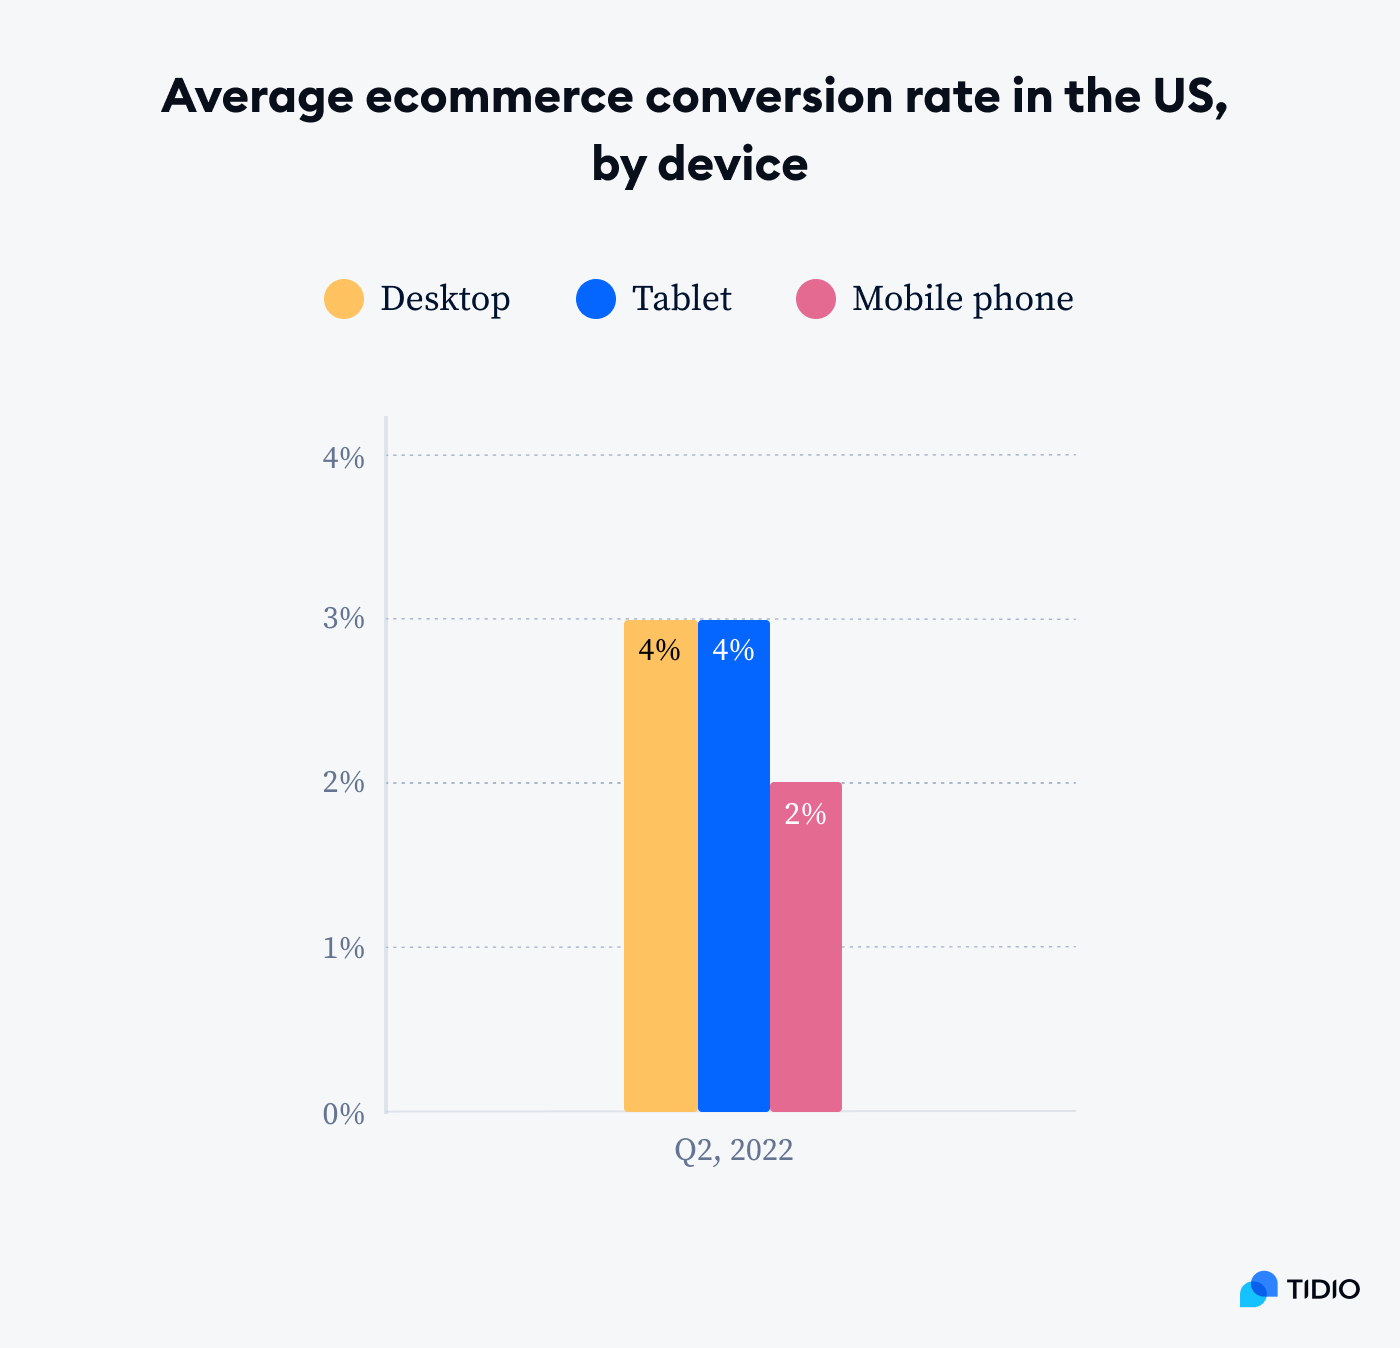 average ecommerce conversion rate in the US by device